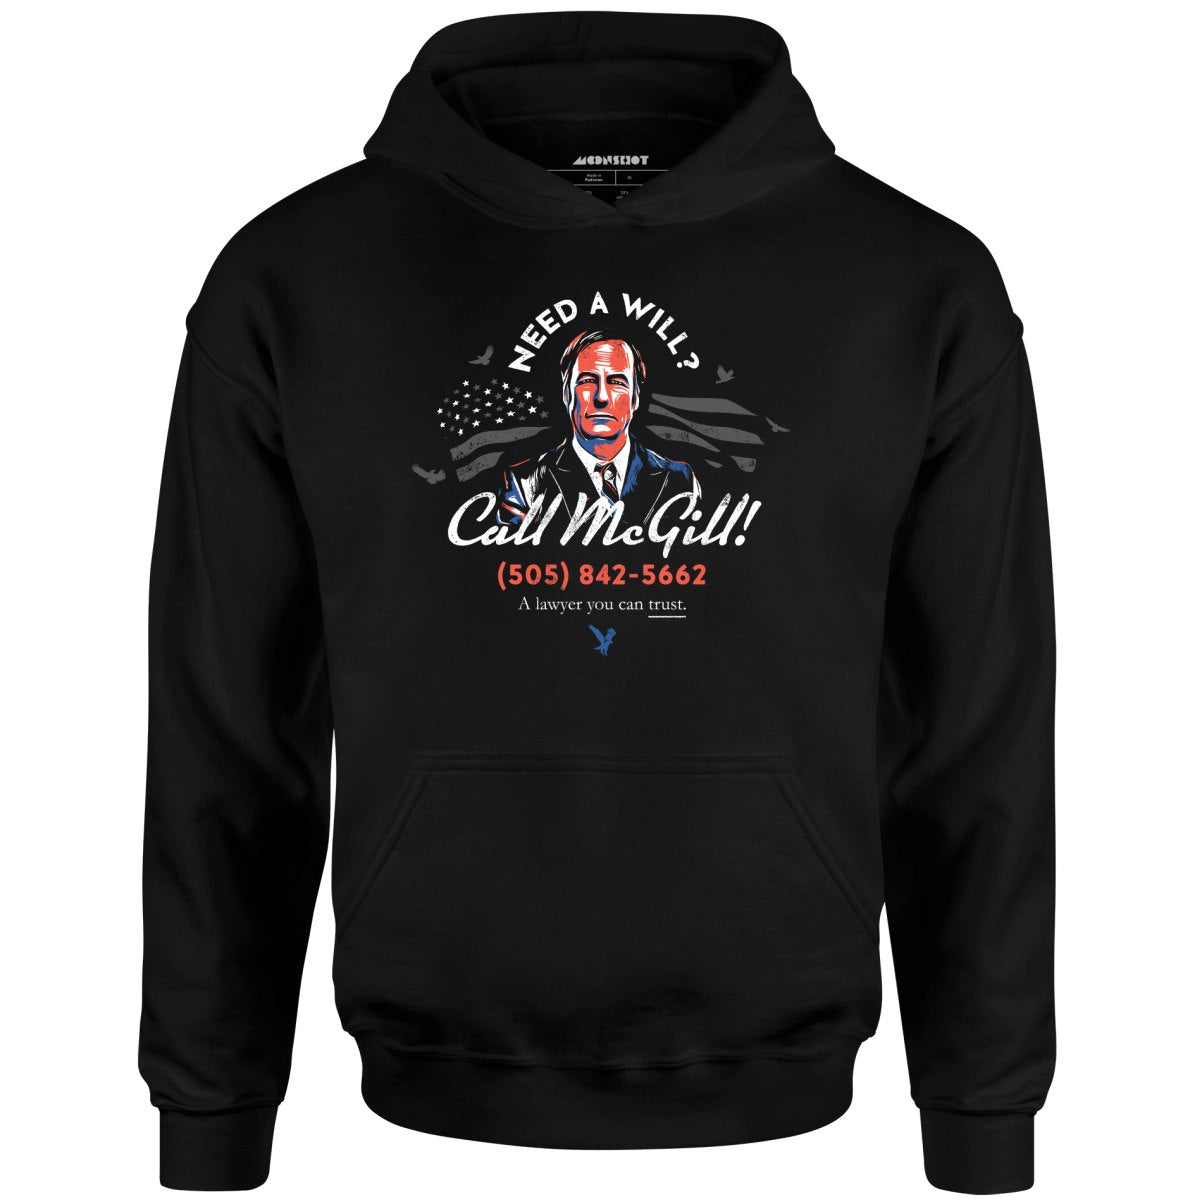 Need a Will? Call McGill - Unisex Hoodie